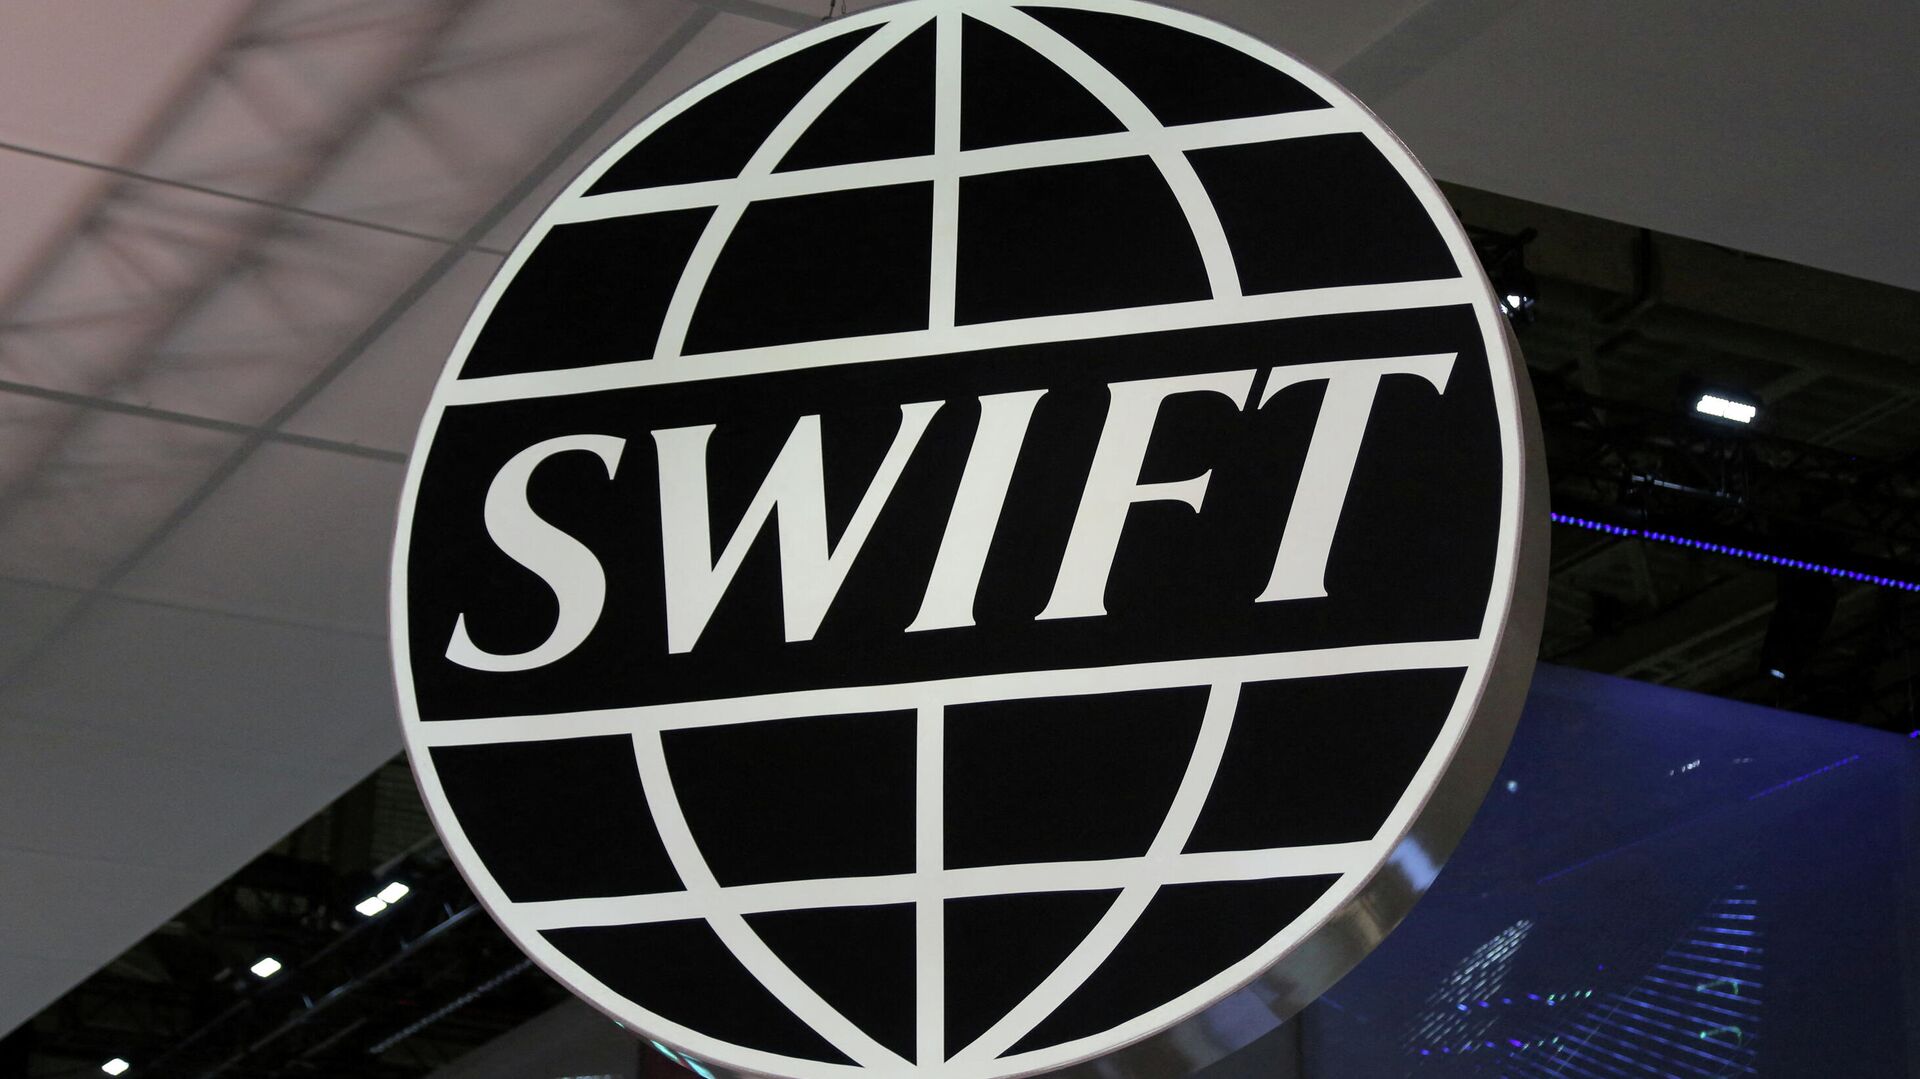 The logo of global secure financial messaging services cooperative SWIFT is seen at the SIBOS banking and financial conference in Toronto, Ontario, Canada October 19, 2017 - Sputnik International, 1920, 26.02.2022